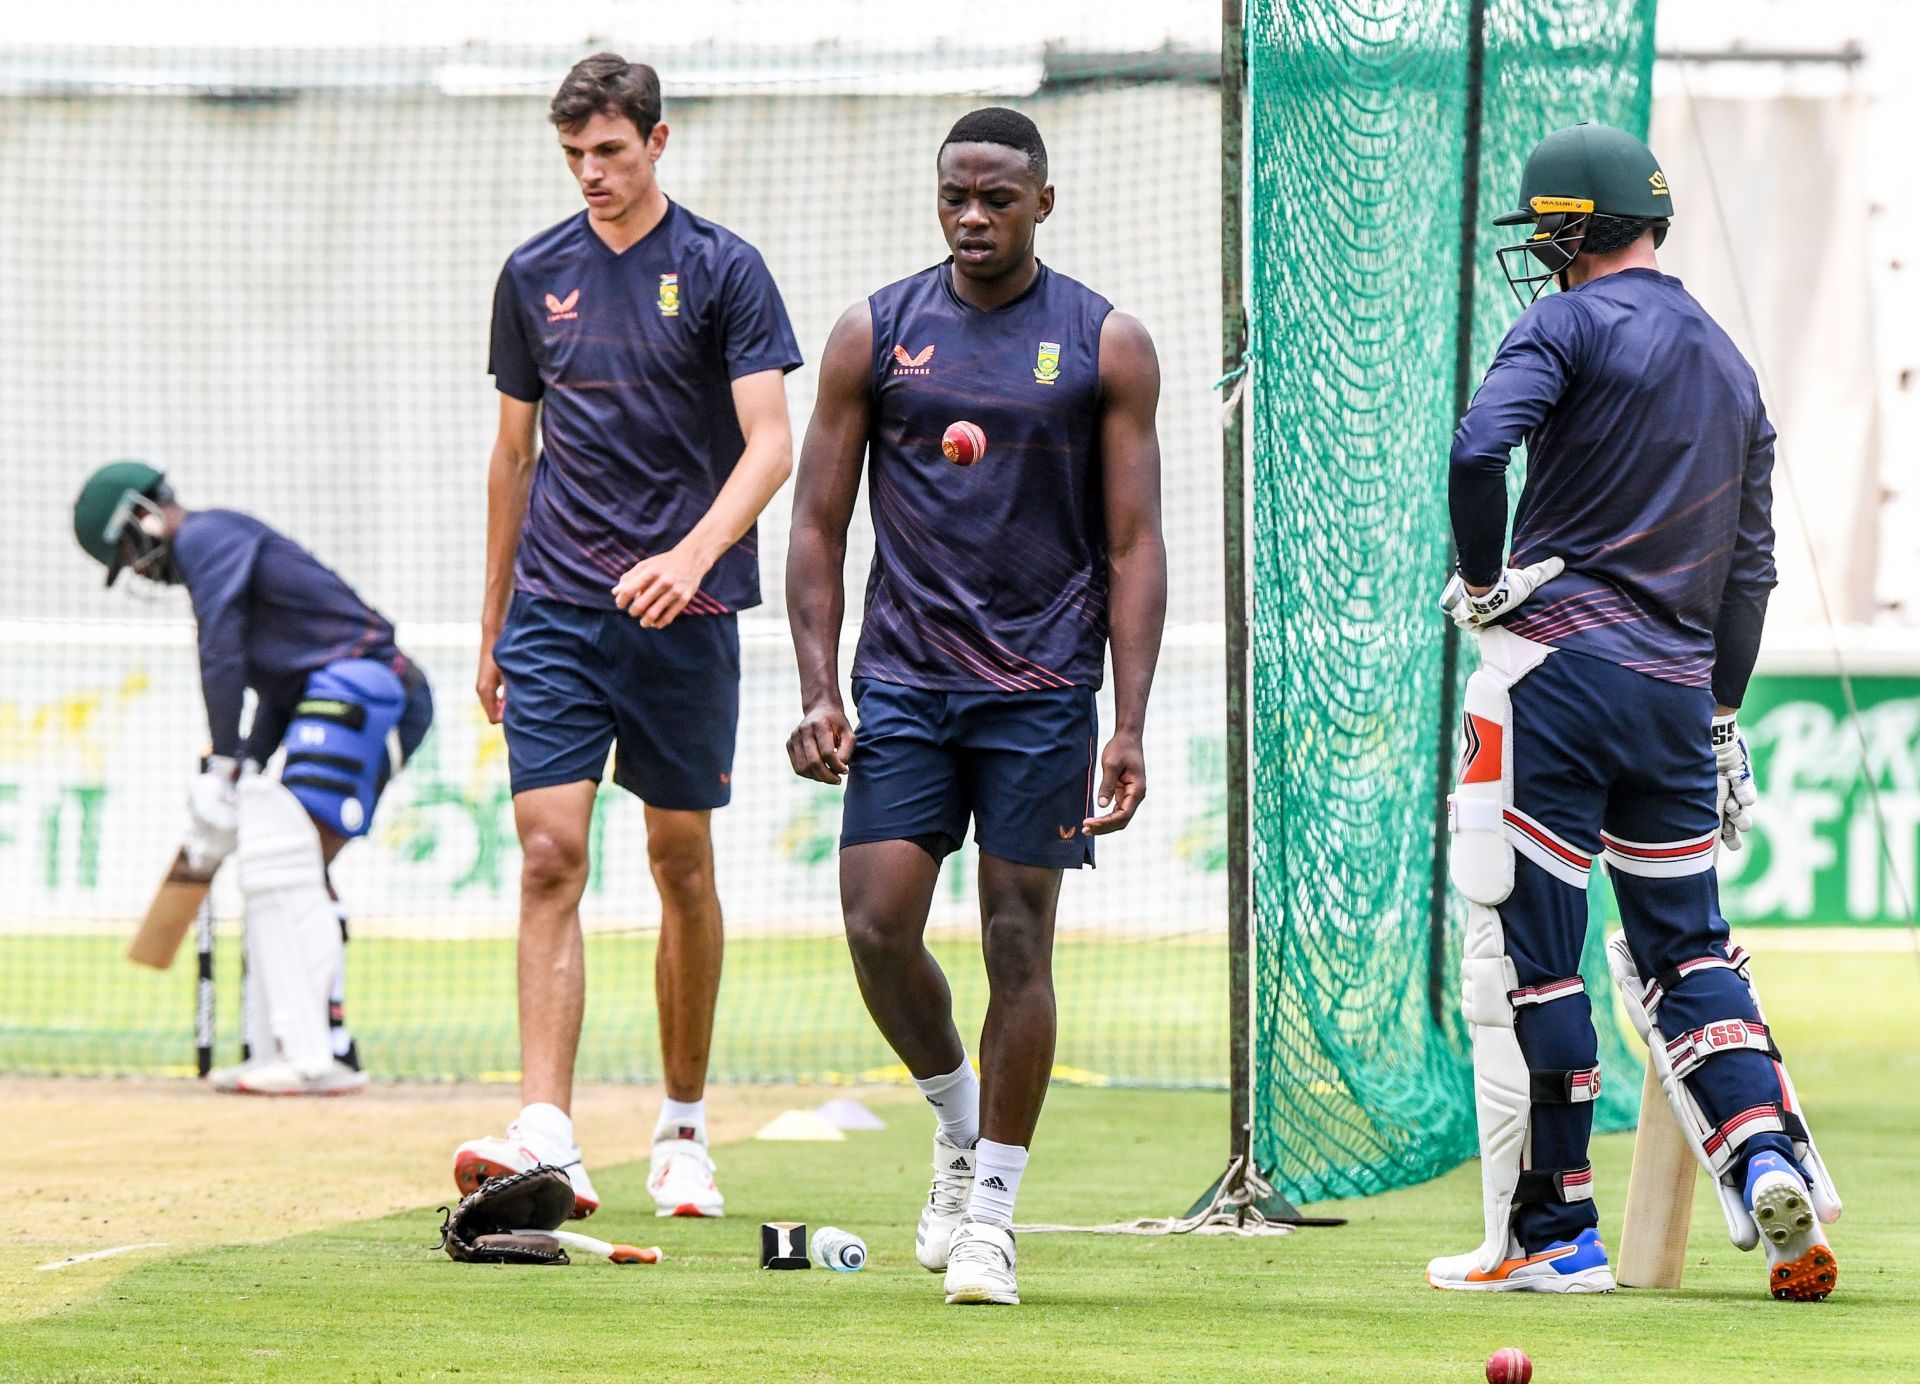 India Tour to South Africa: South Africa Training Session